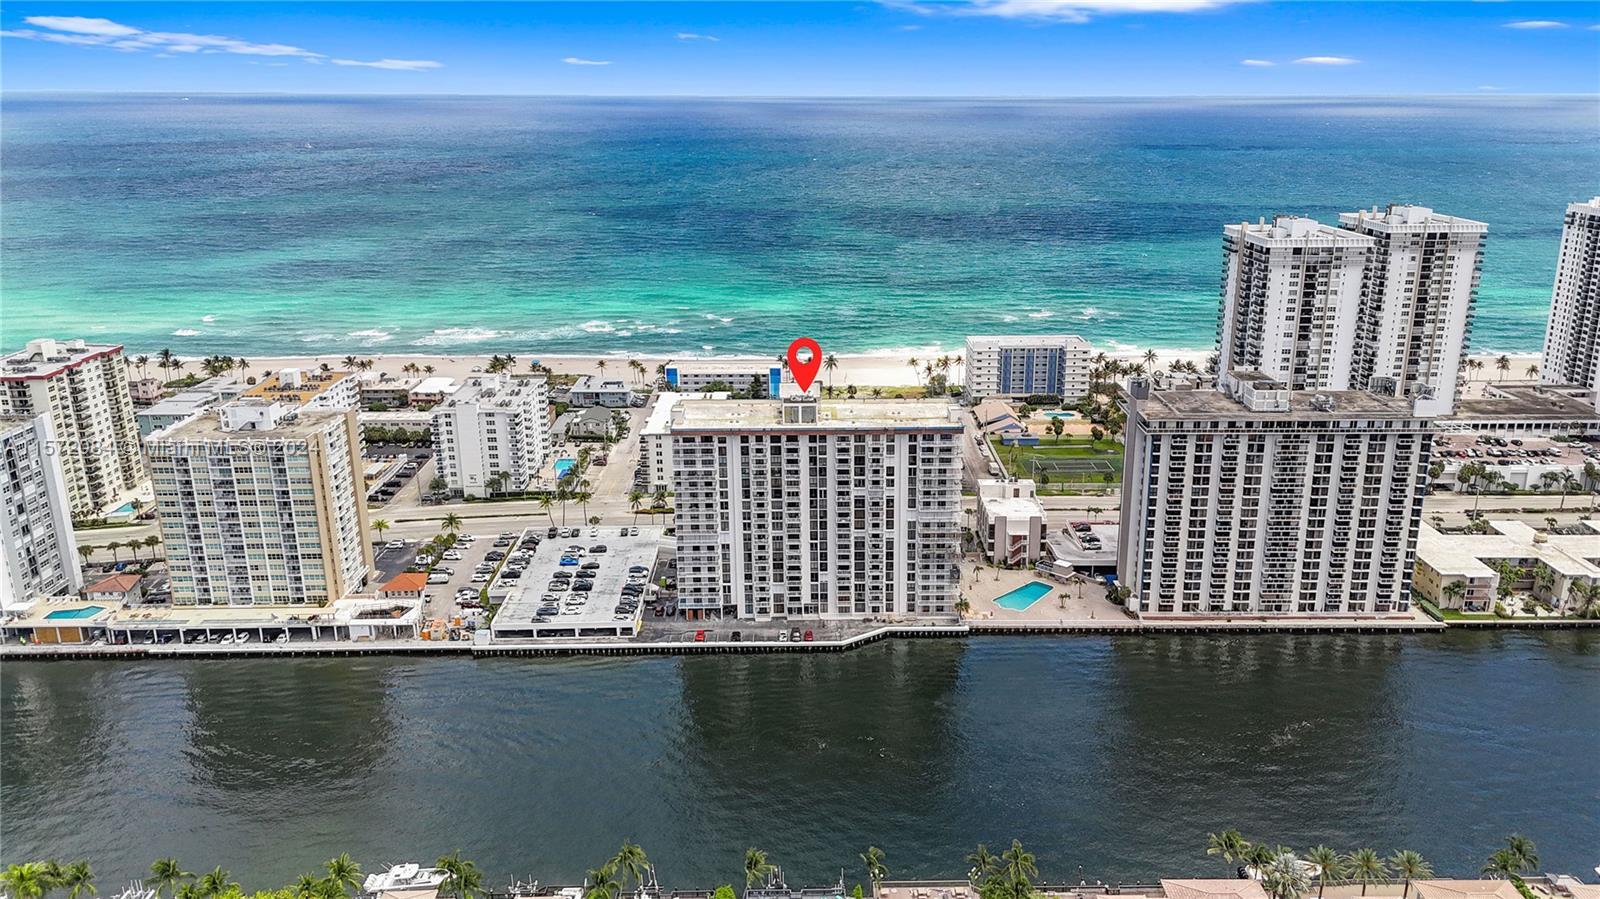 The cleanest Condo around! Beautiful Corner unit with Ocean and Intracoastal Views, Fully Remodeled 